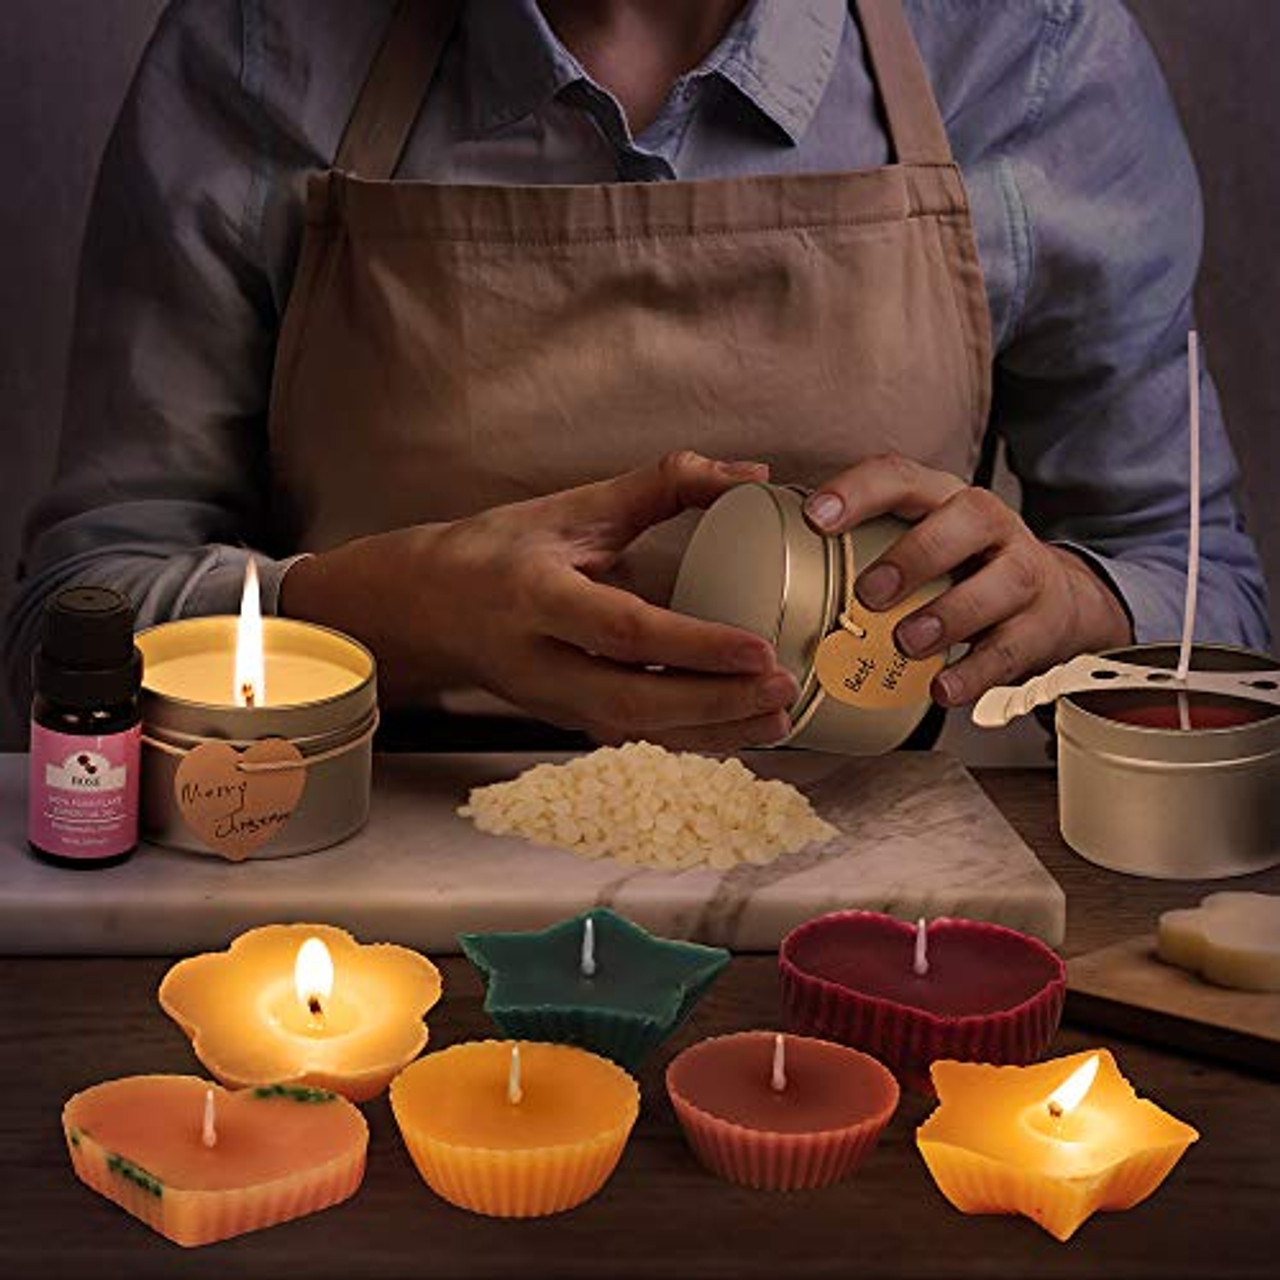 Ash & Harry Candle Making Kit with Natural Soy Wax for Candle Making - DIY  Candle Making